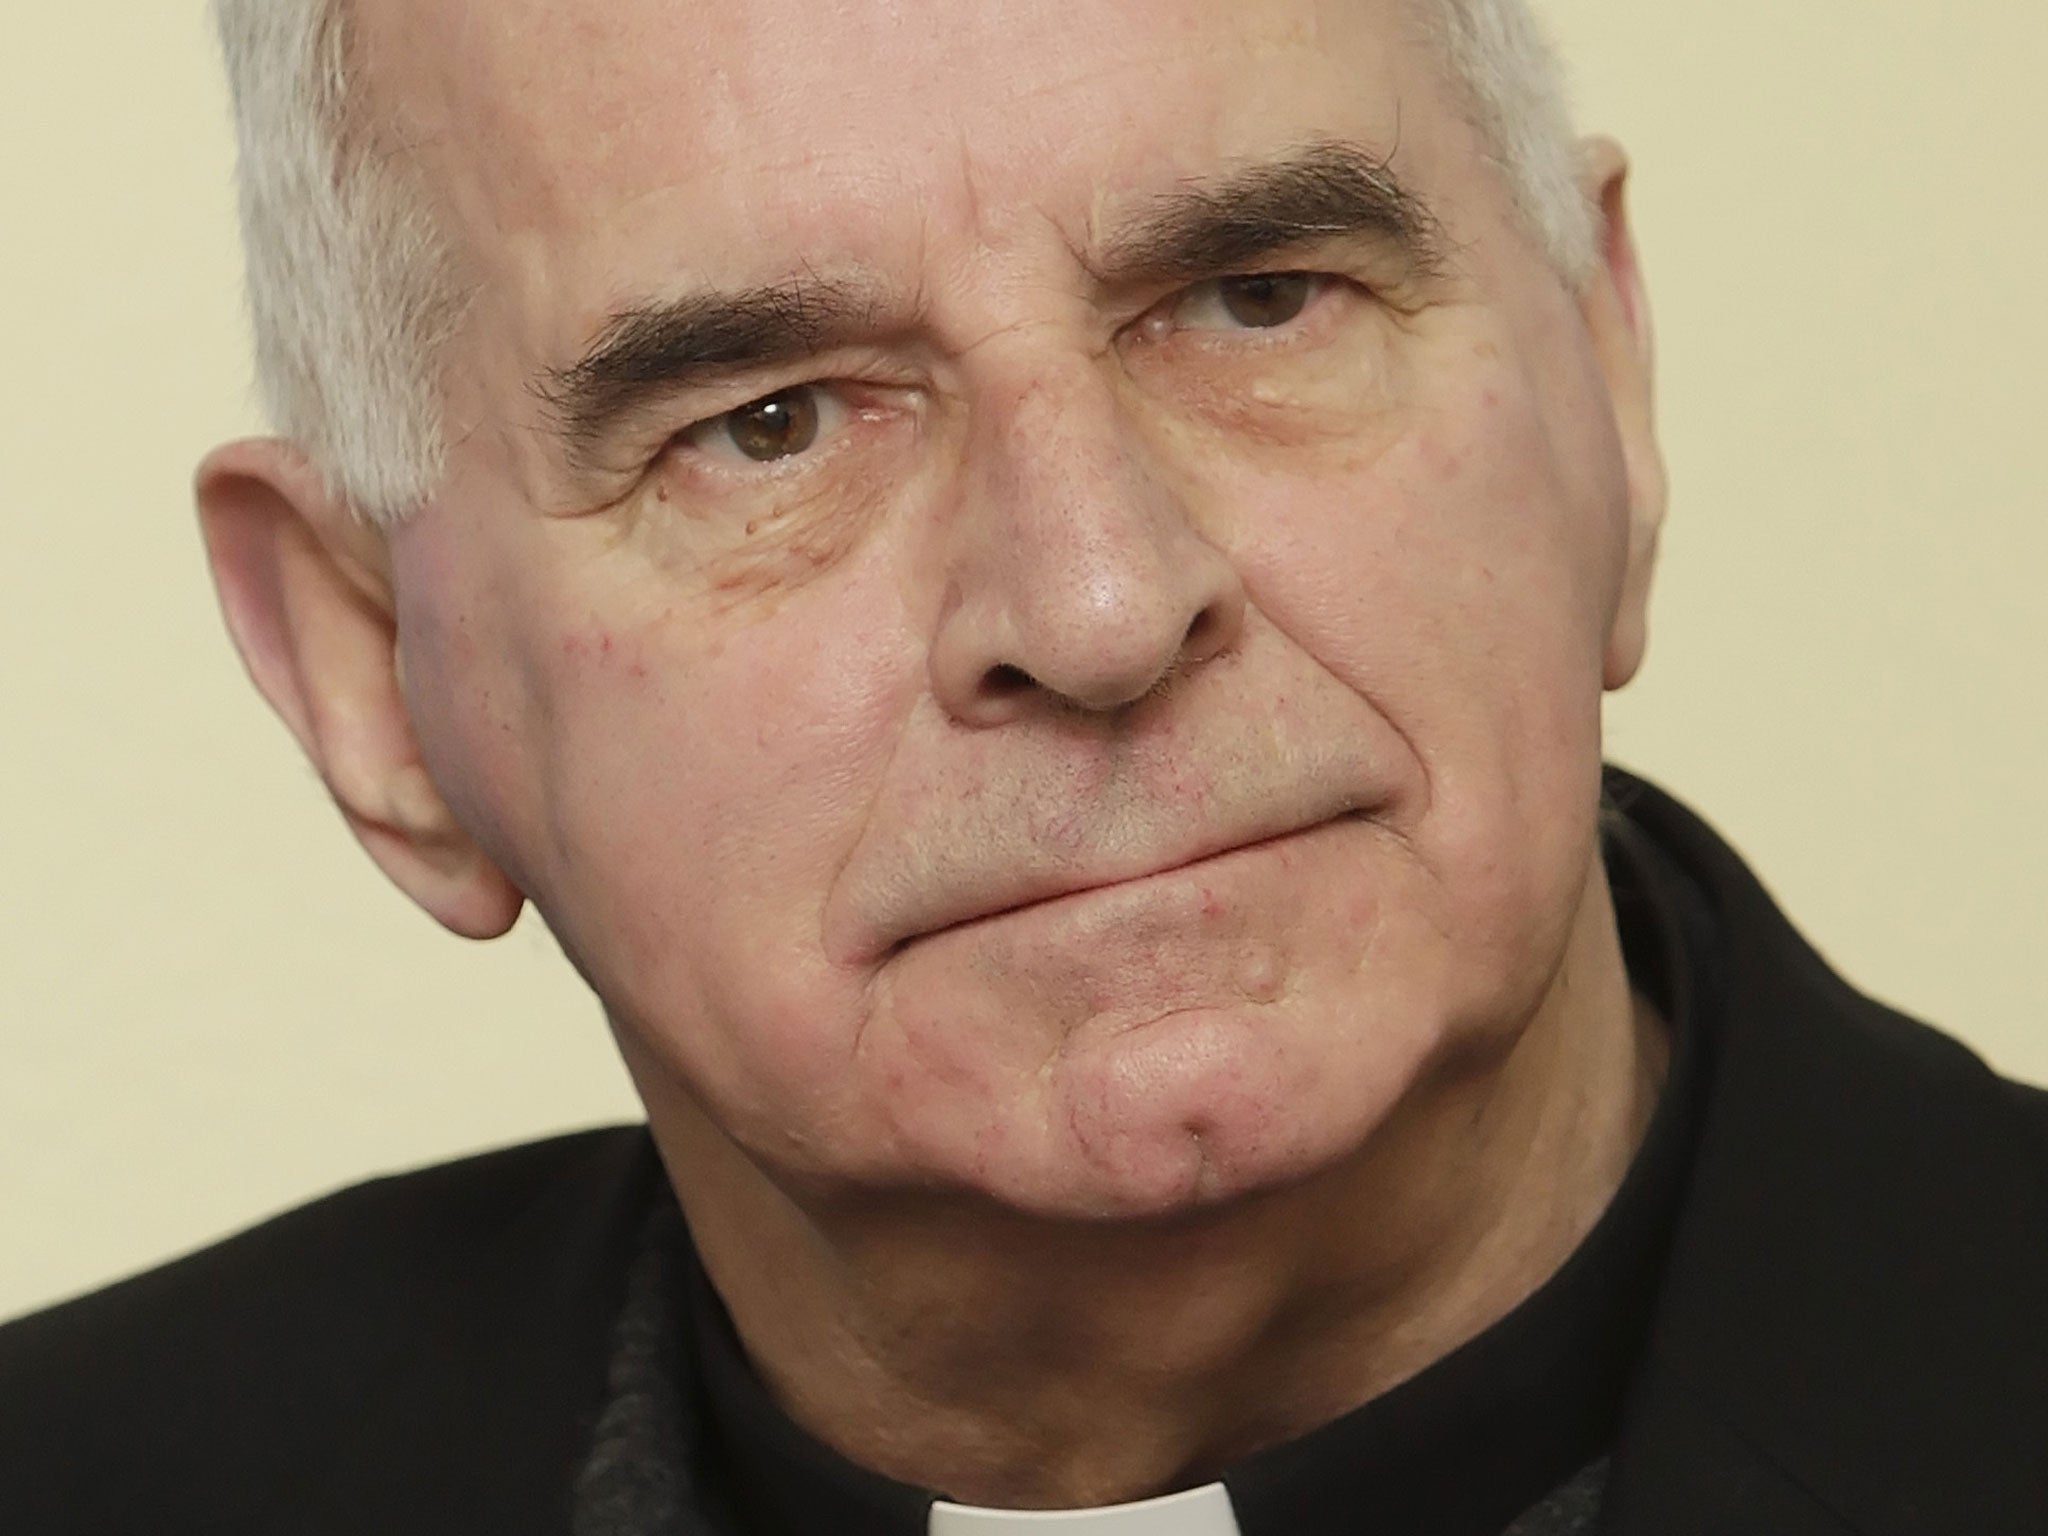 Cardinal Keith O'Brien, who is 74, is due to retire next month